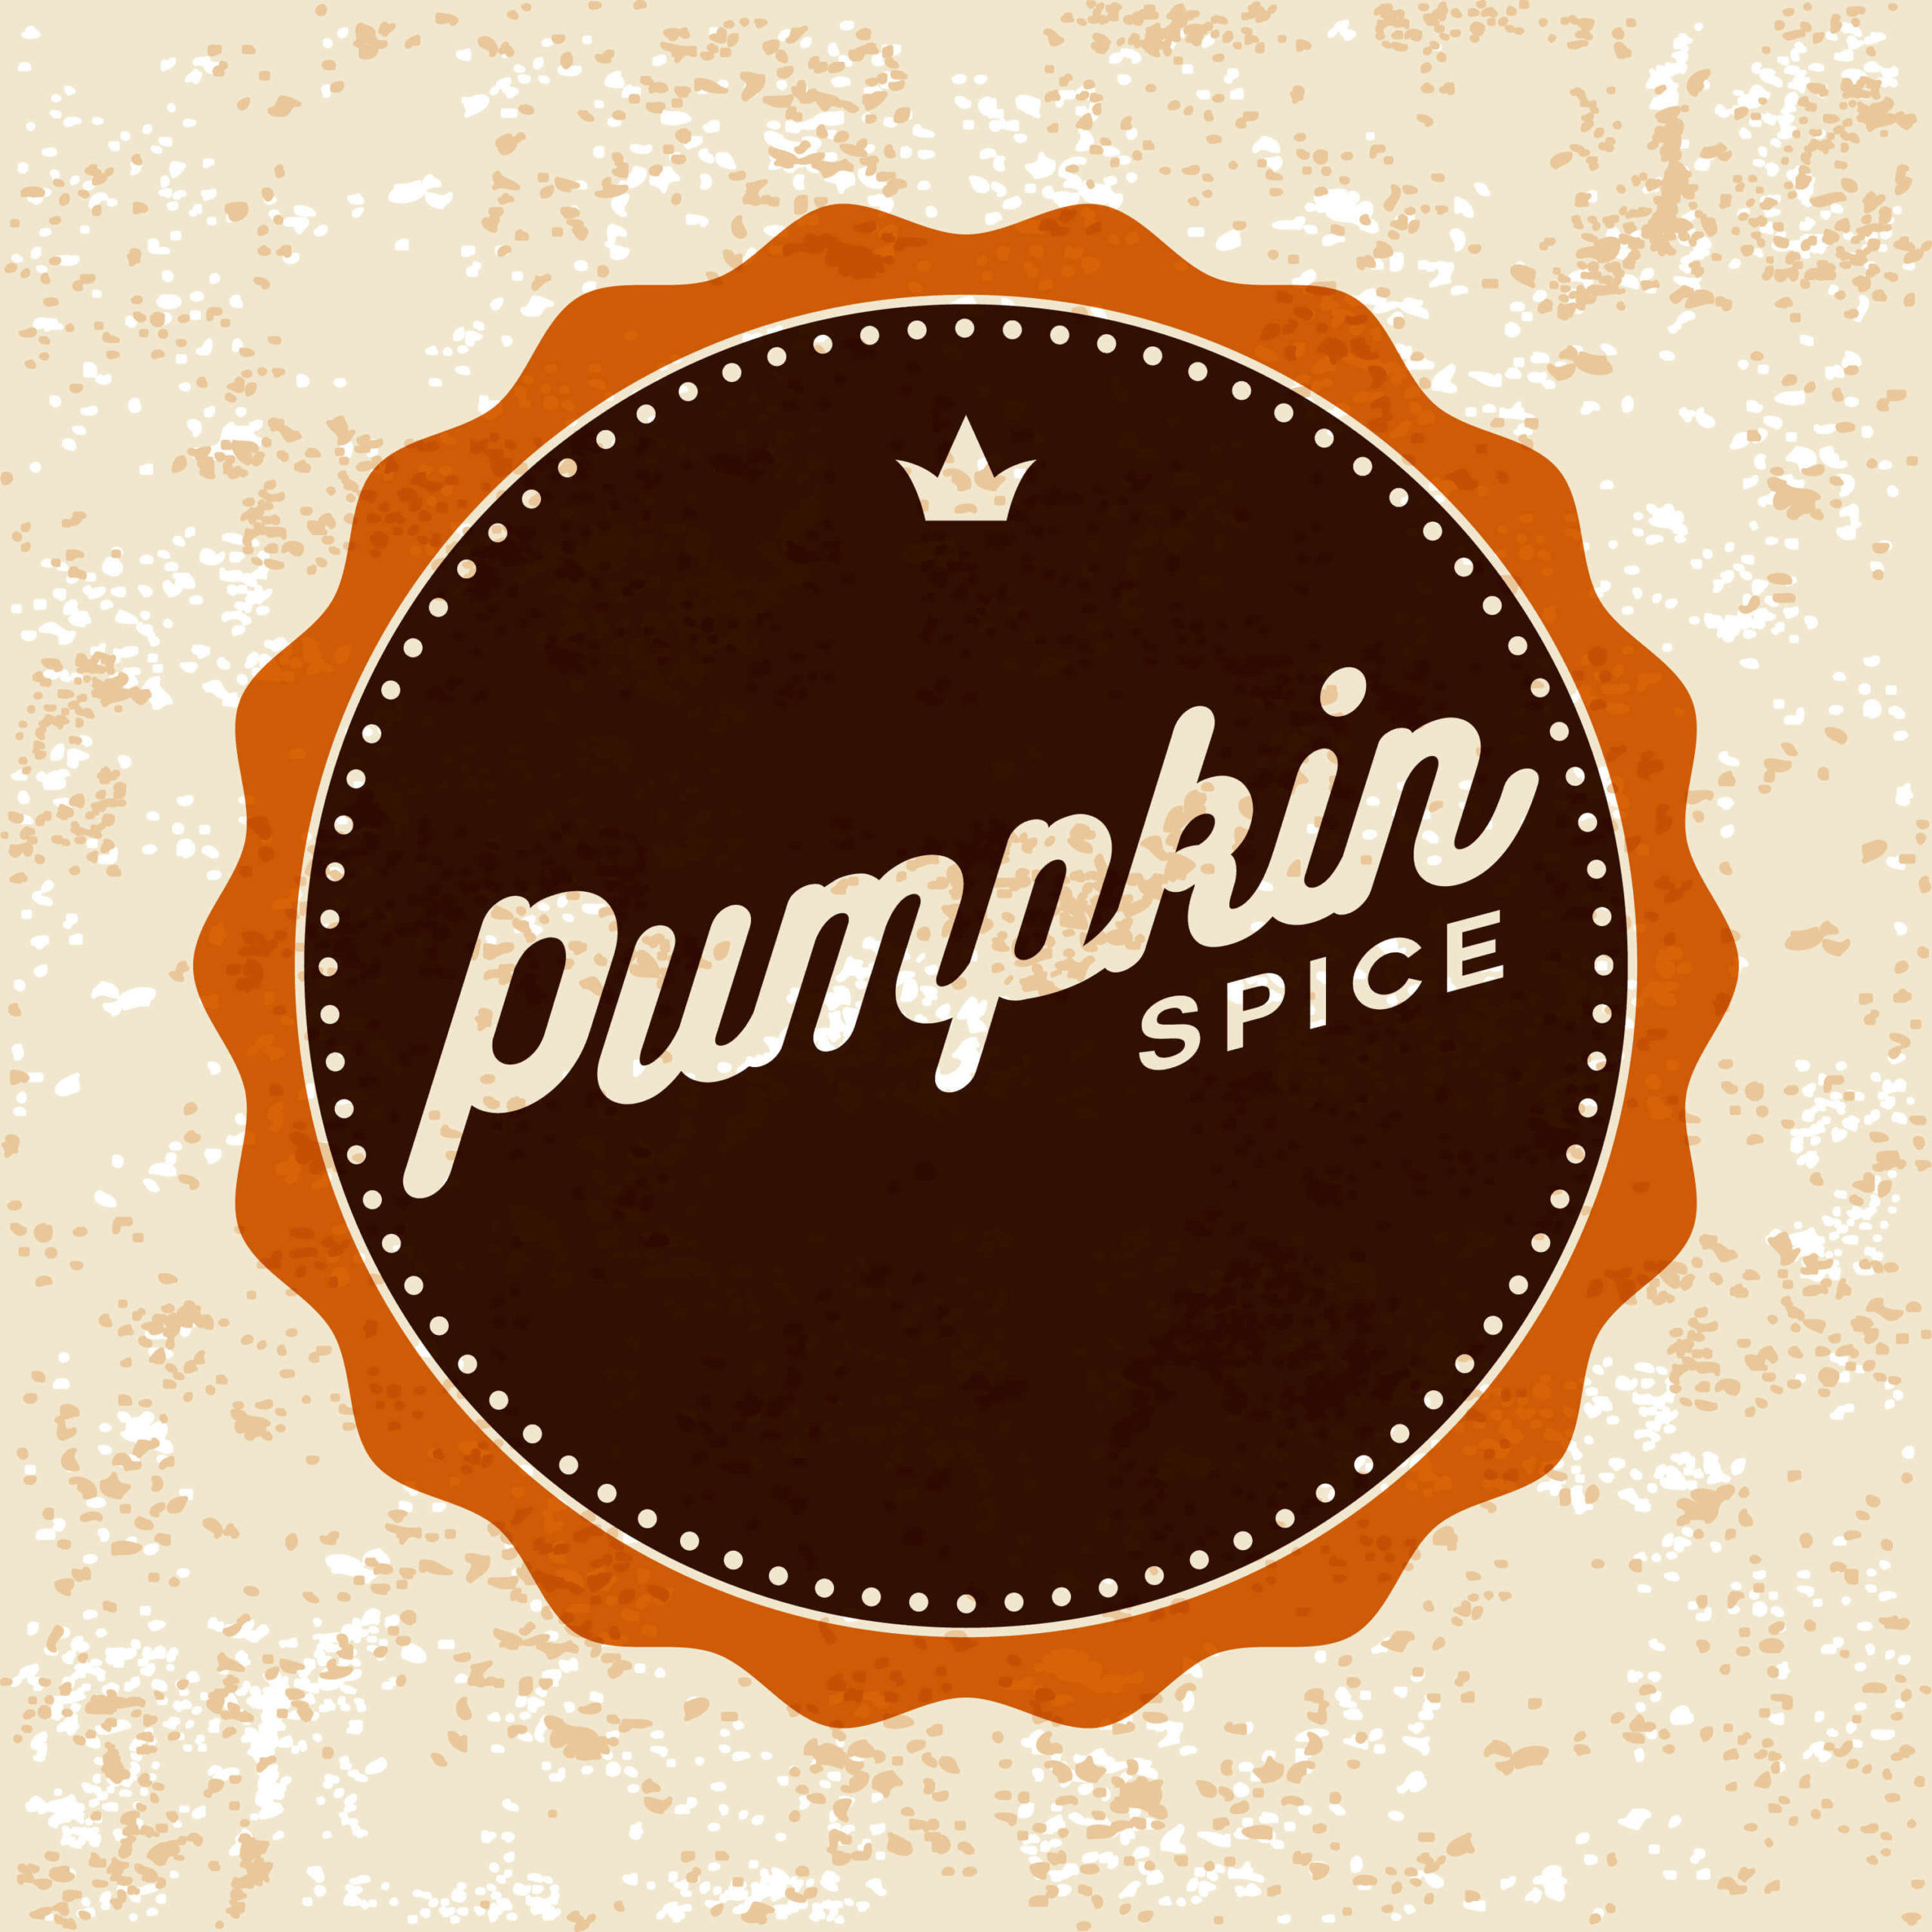 A circular pumpkin pie spice label on a grungy textured background. File is built in CMYK for optimal printing and uses Global color swatches for easy color changes. The label is transparent (multiply opacity).